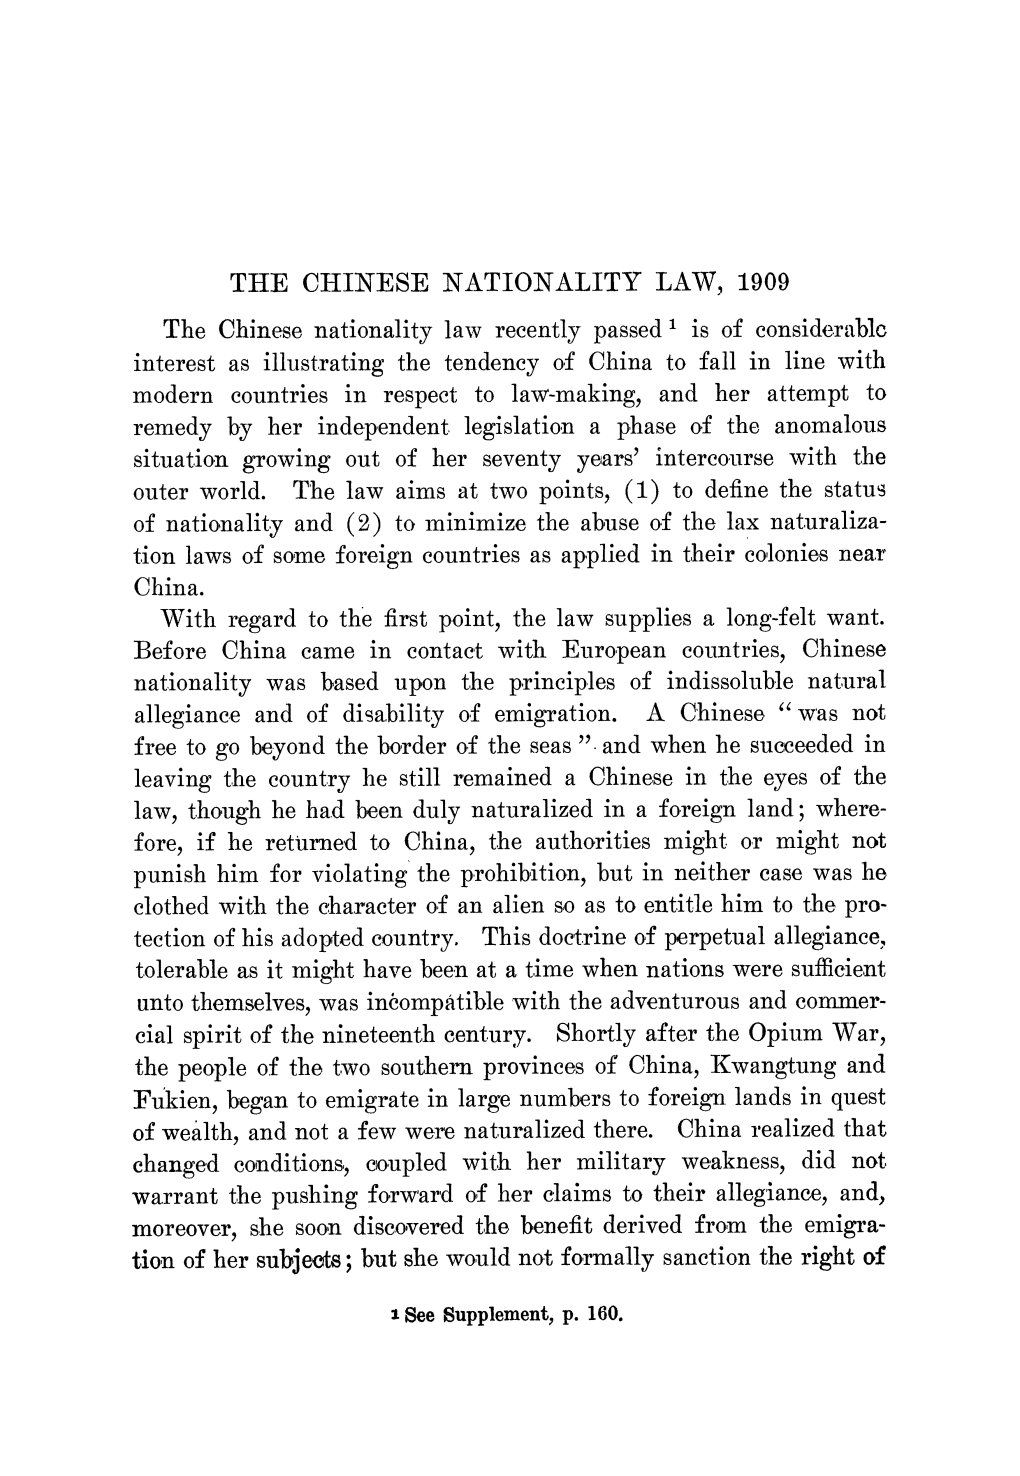 The Chinese Nationality Law, 1909